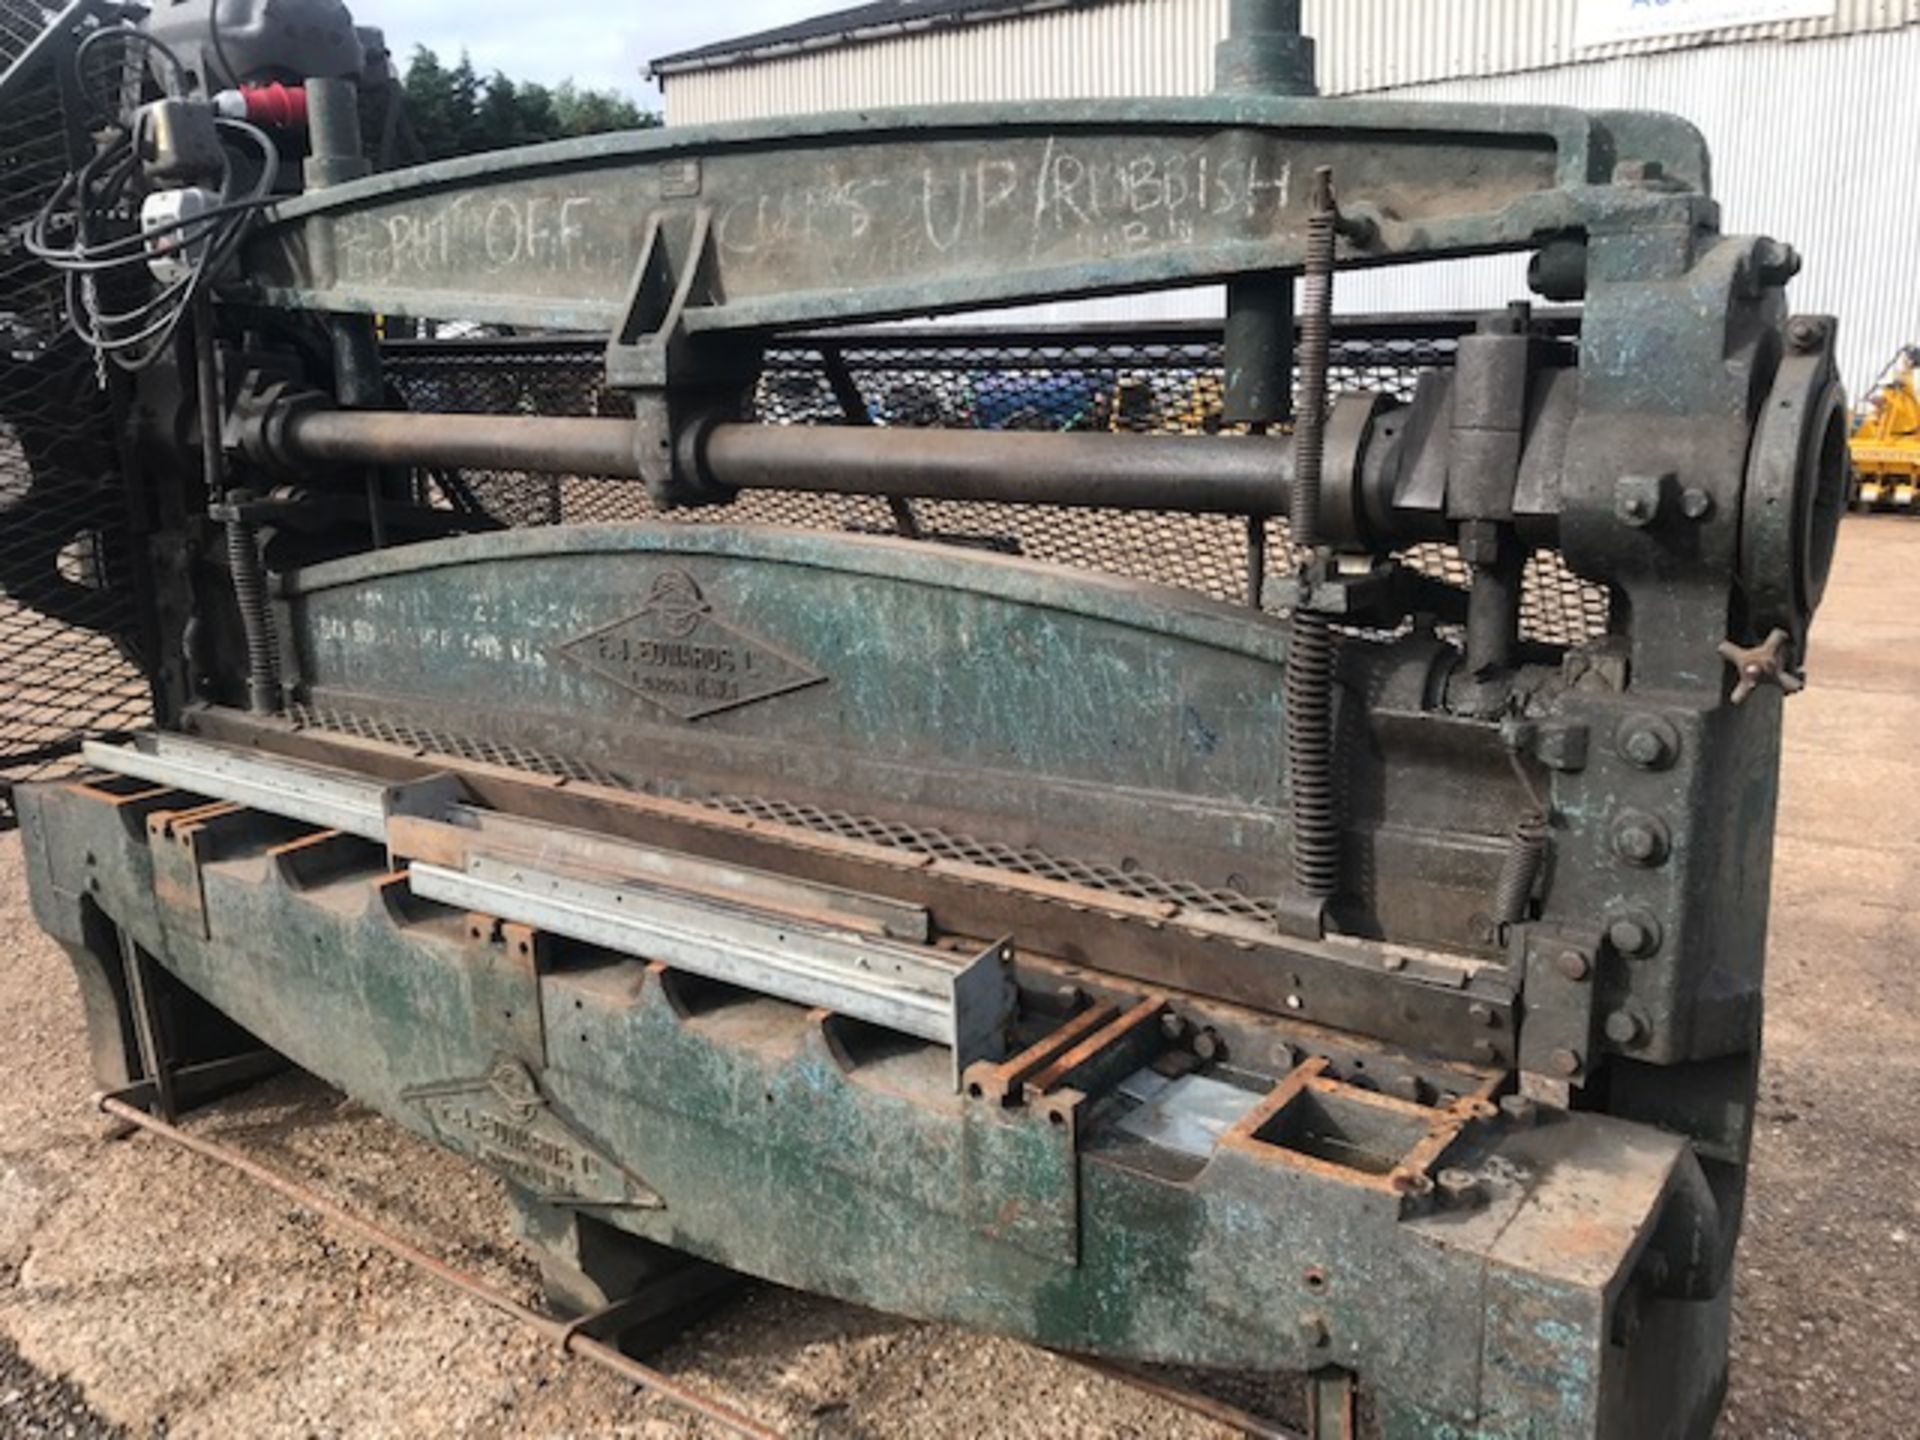 EDWARDS 3 PHASE GUILLOTENE, 8FT BLADE, WORKING WHEN RECENTLY REMOVED.